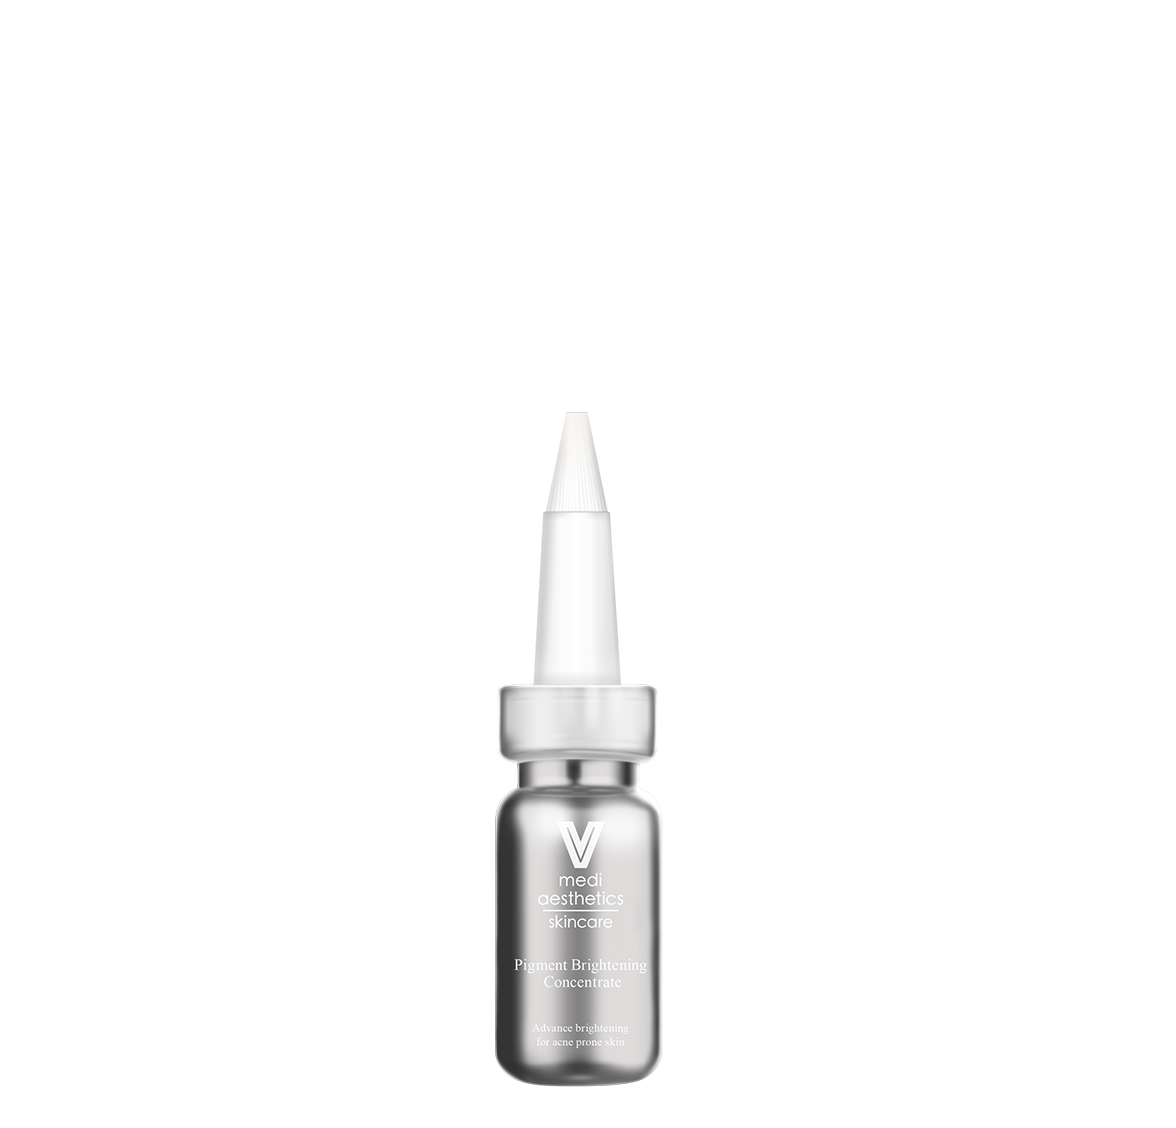 Pigment Brightening Concentrate